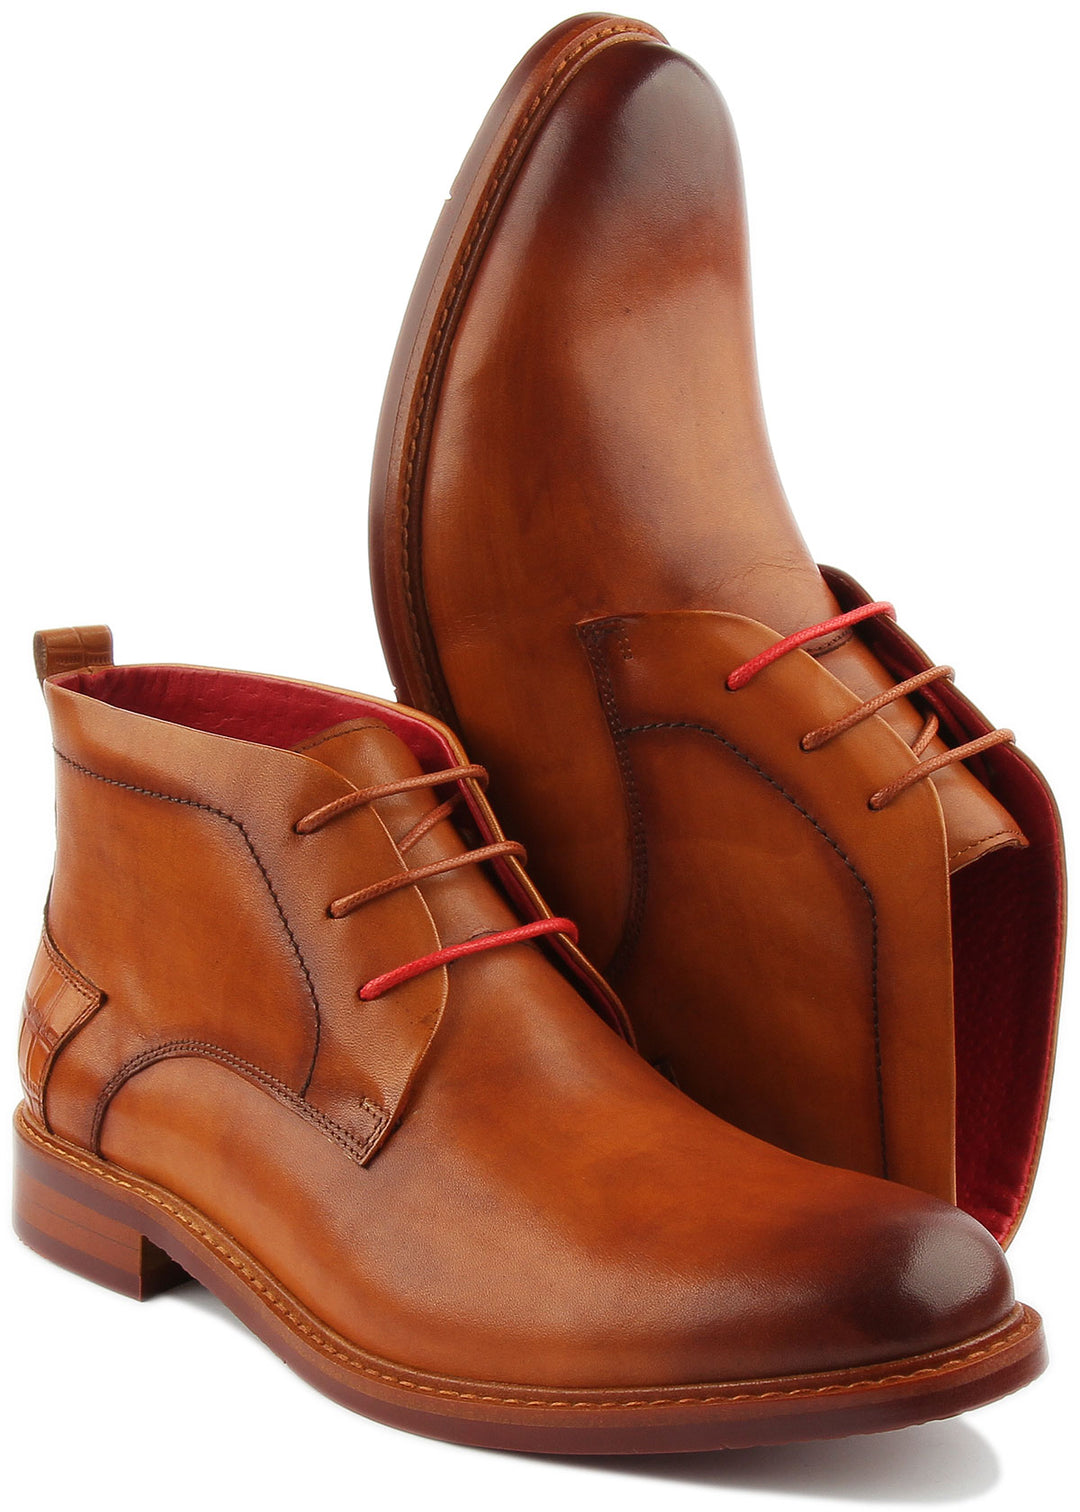 JUSTINREESS ENGLAND Mens Ankle Boots Stuart Ankle Boot in Tan Leather